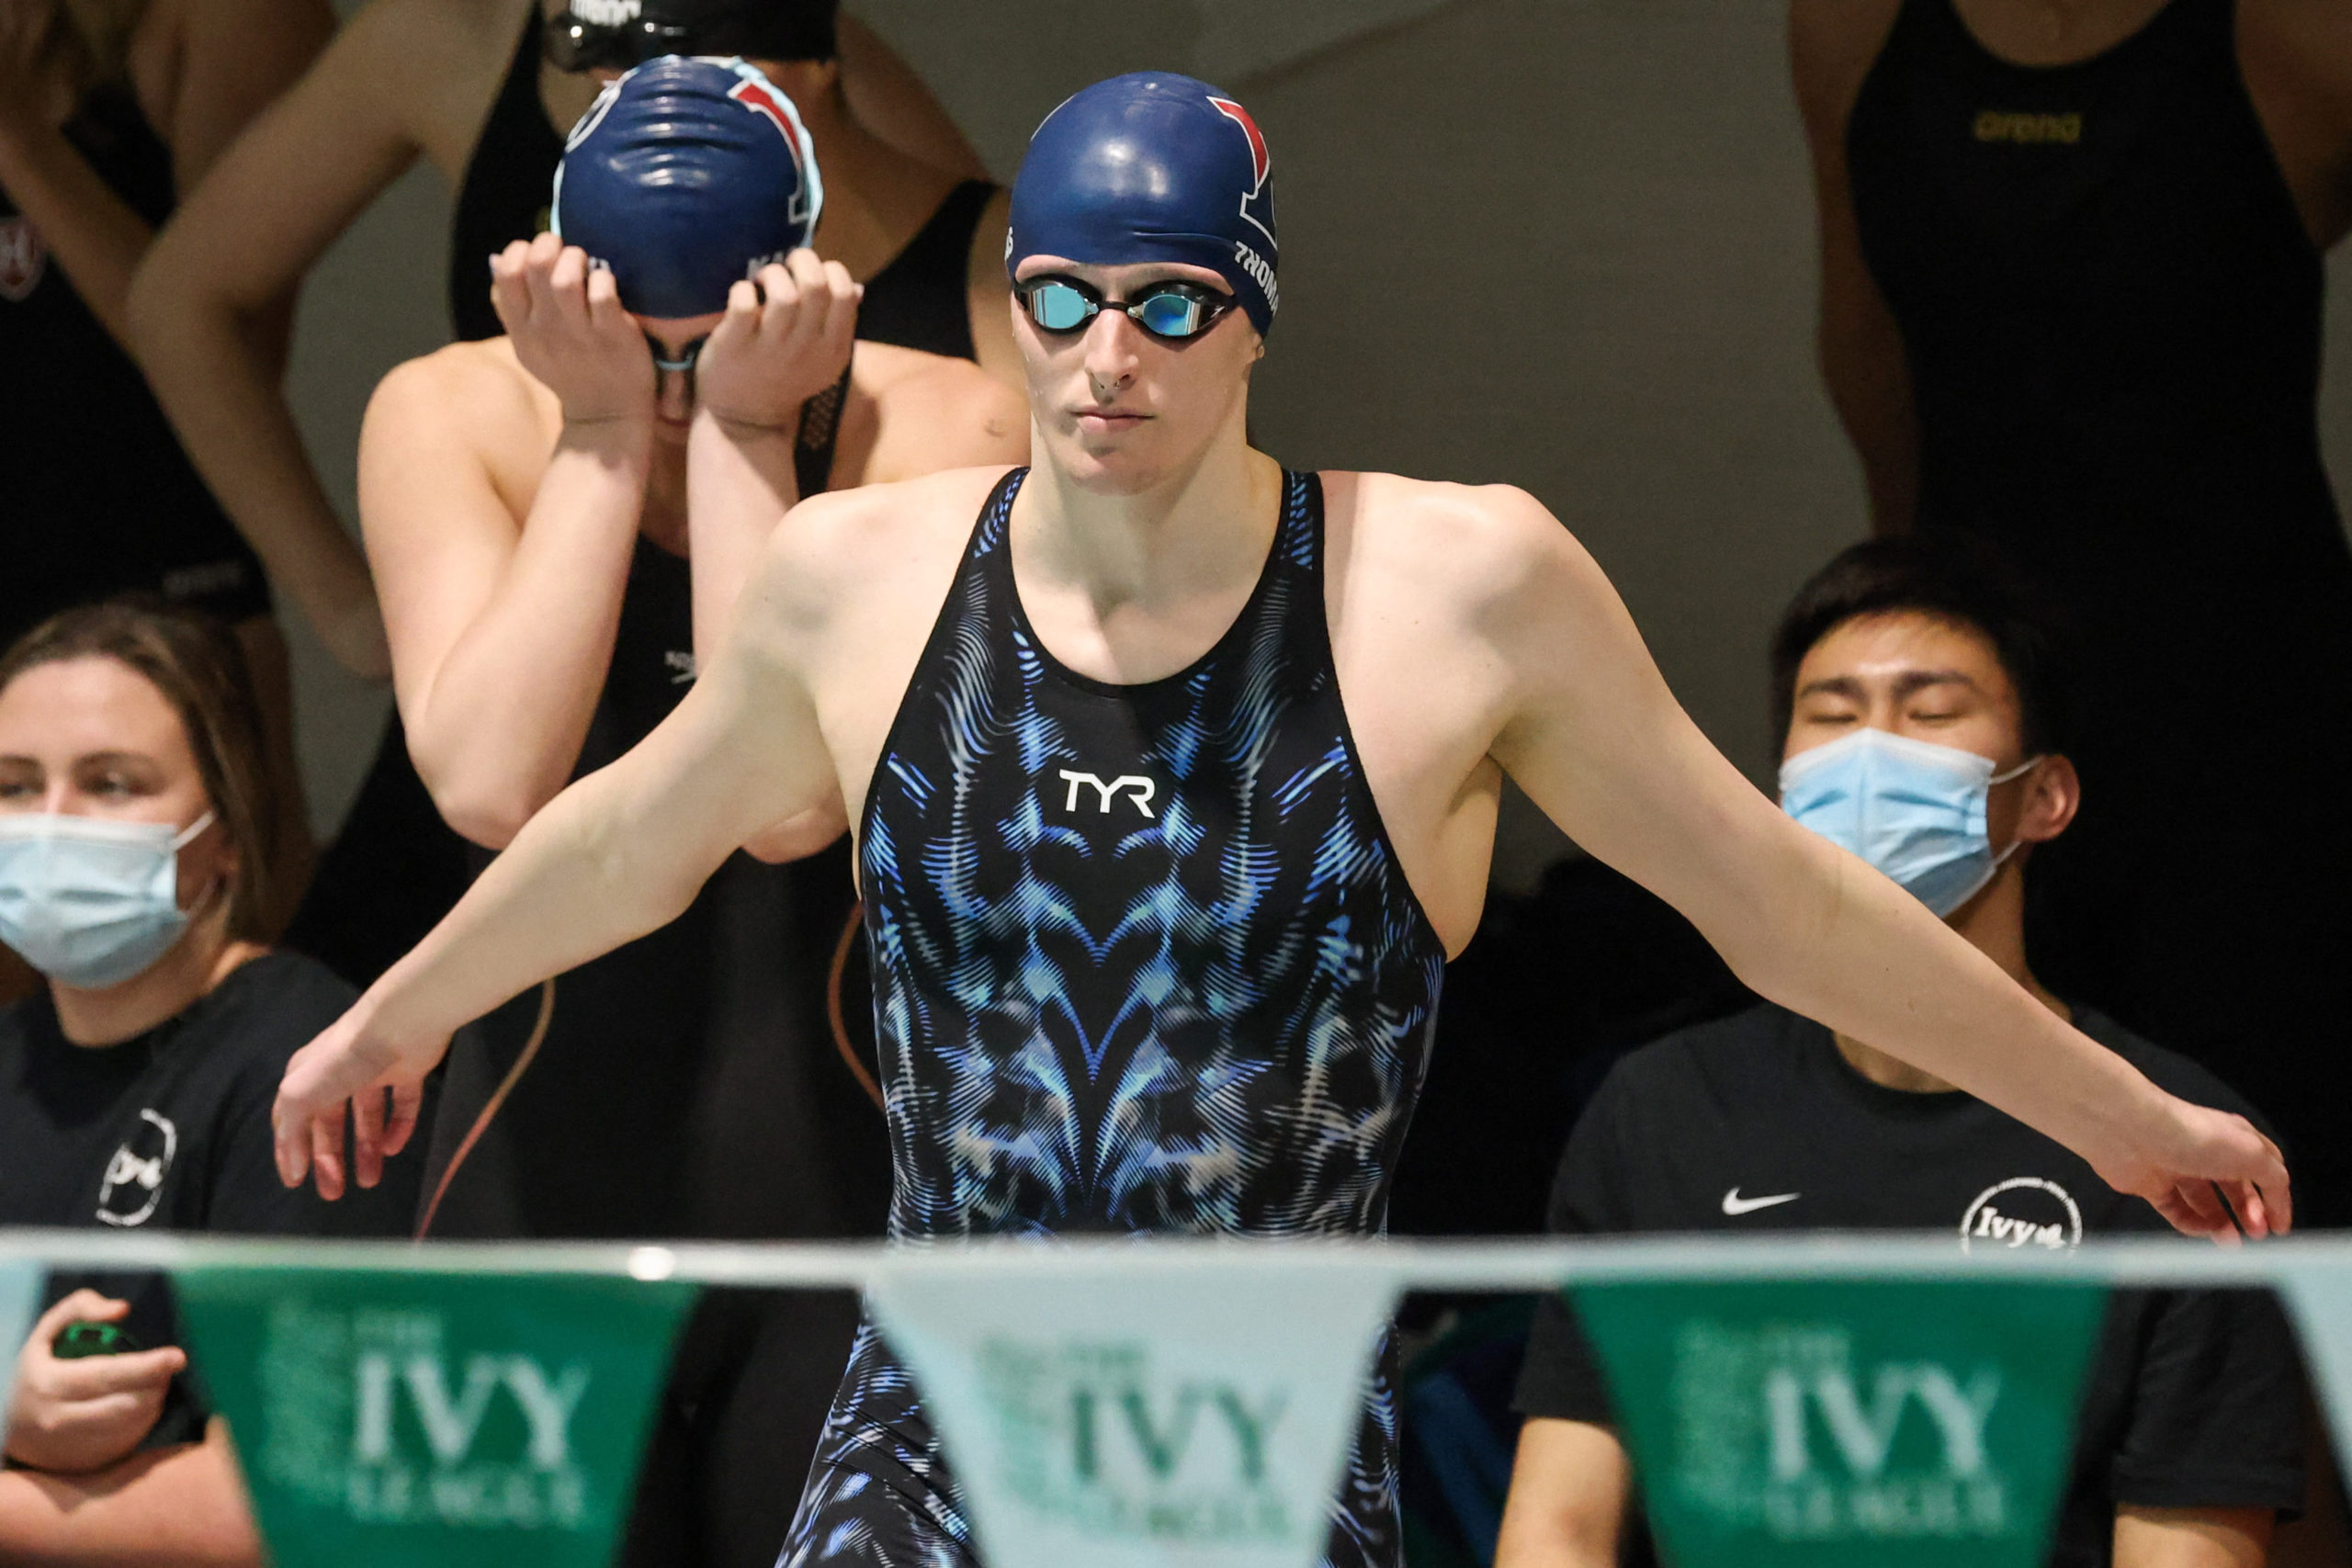 Male Athlete Set to Win Women’s NCAA National Swimming Championships